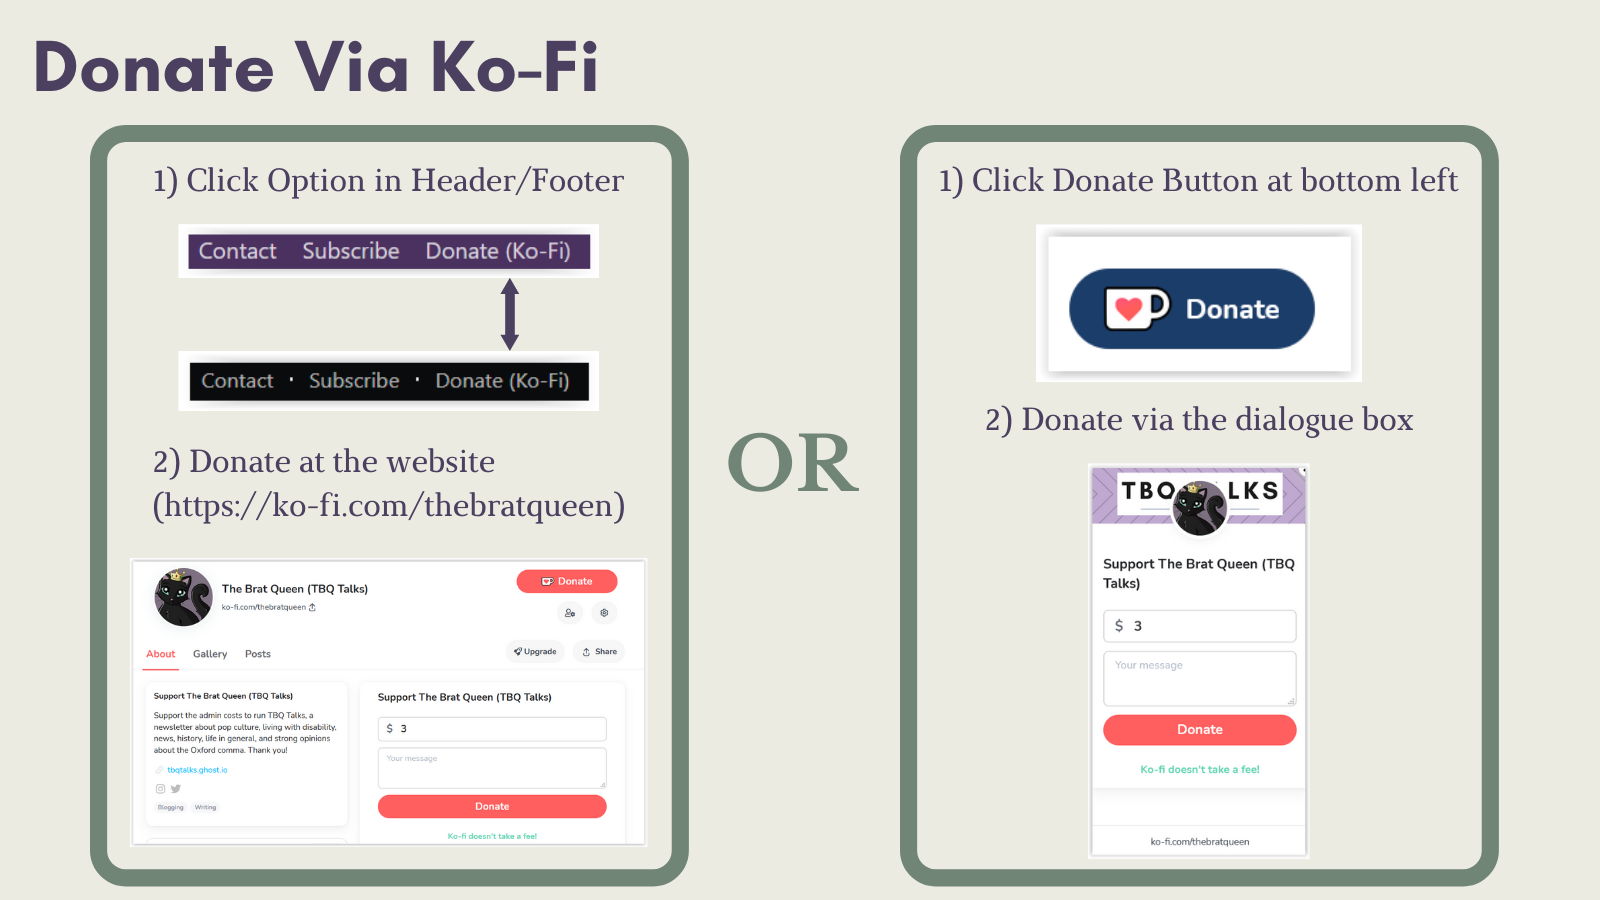 A visual depiction of the above instructions on how to donate via Ko-Fi